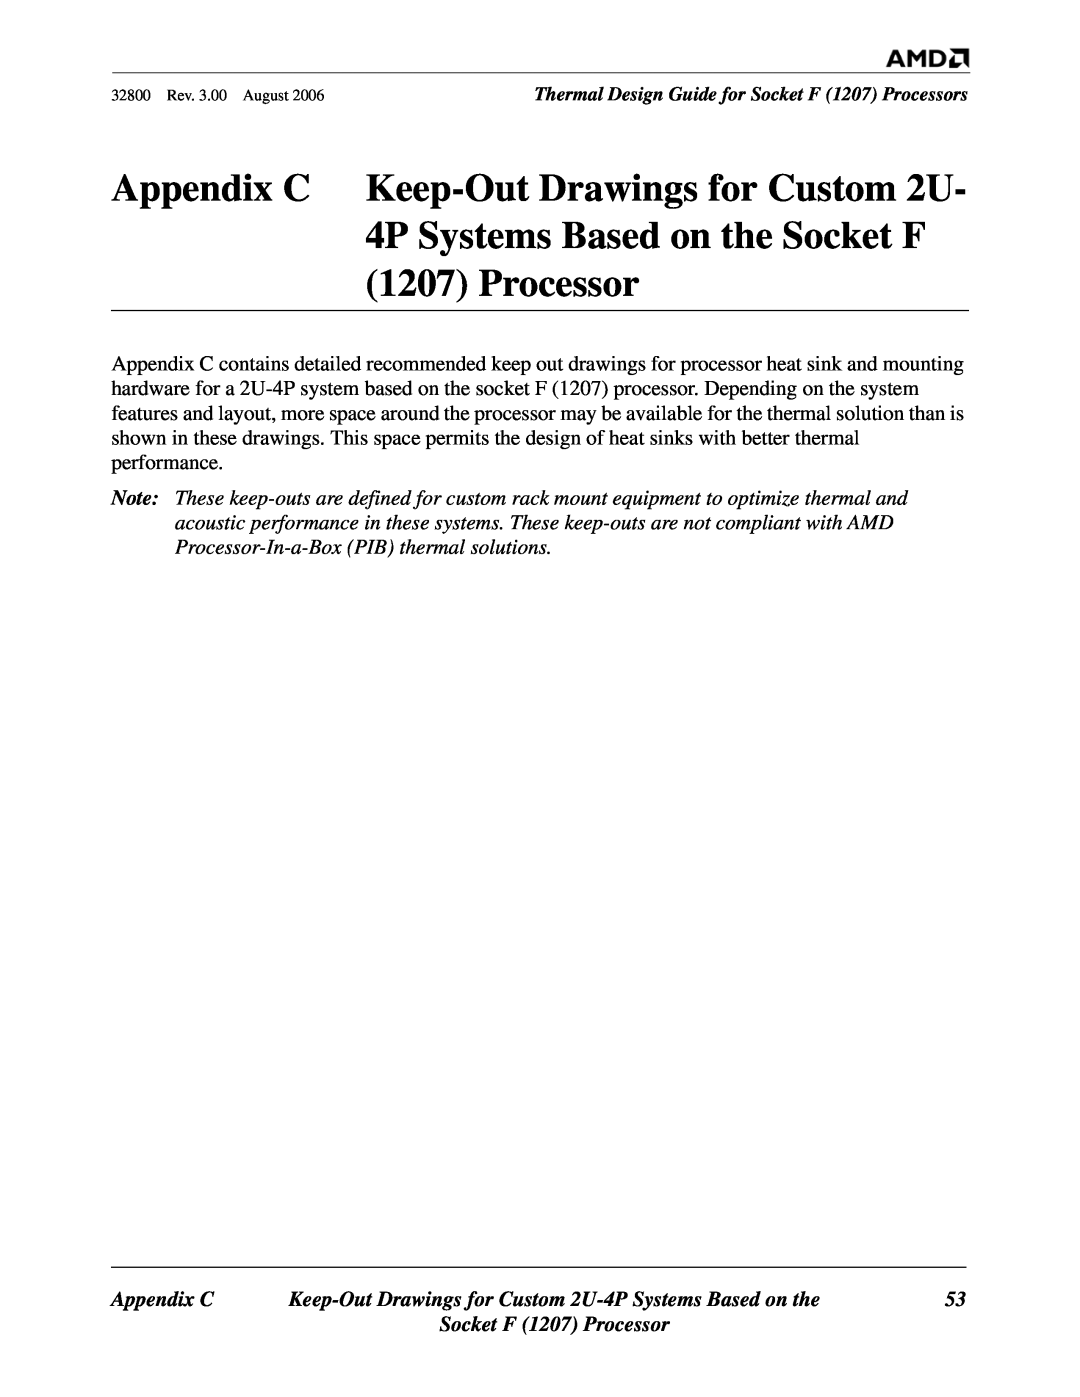 AMD manual Appendix C, Socket F 1207 Processor, Keep-Out Drawings for Custom 2U-4P Systems Based on the 